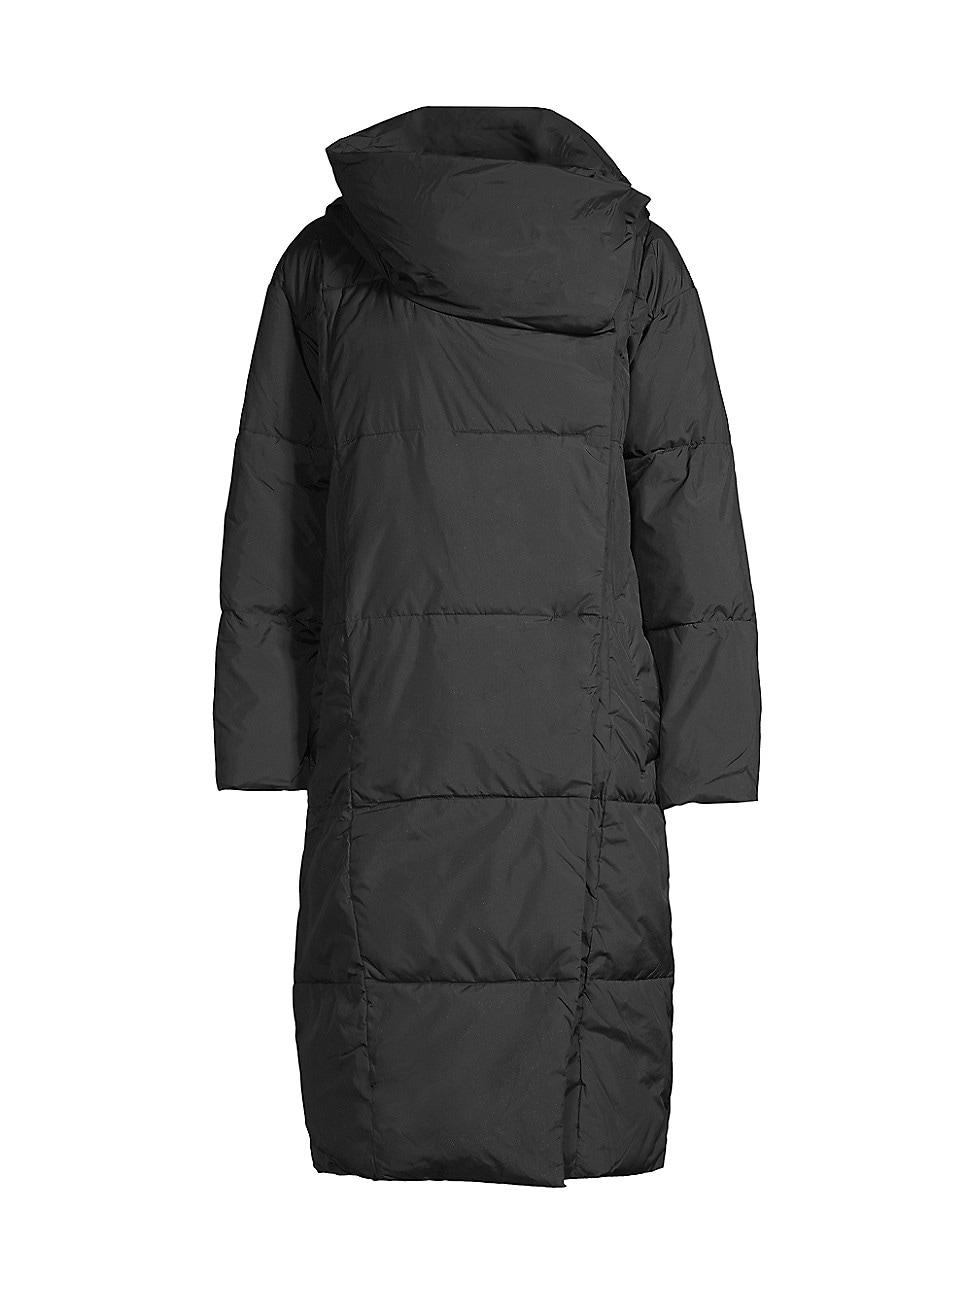 UGG Catherina Puffer Jacket in Black | Lyst